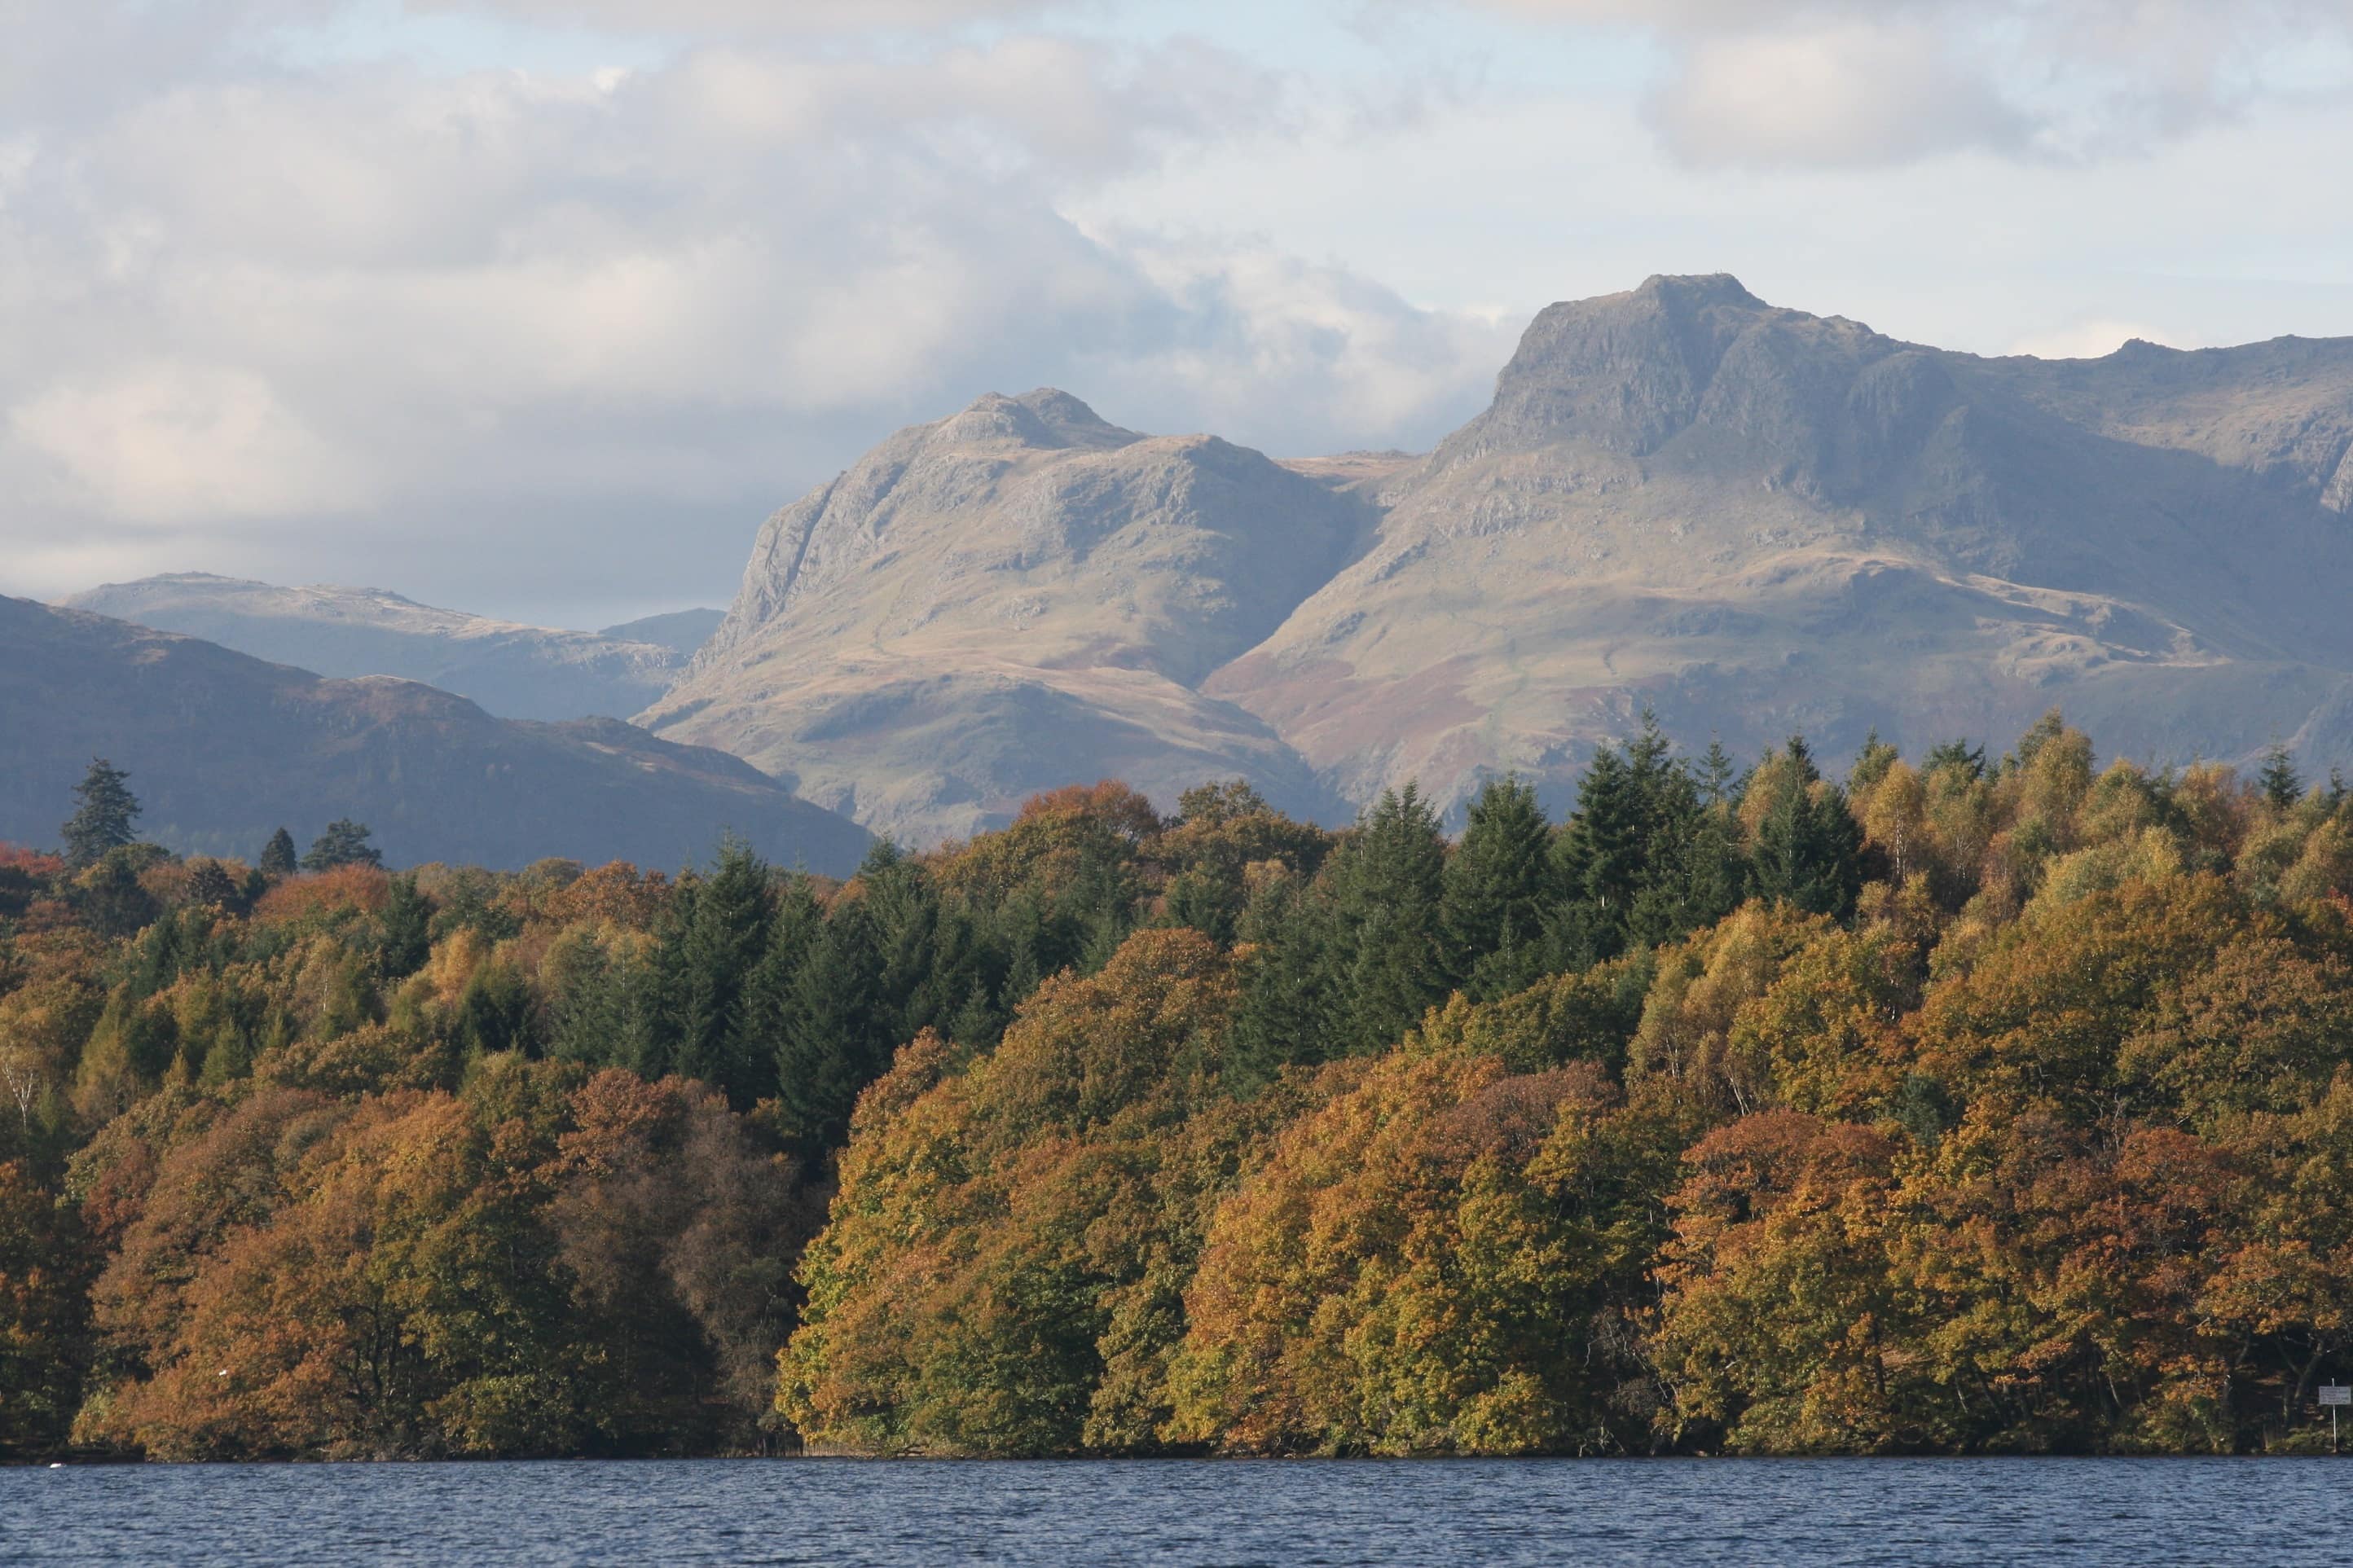 Cottages to rent in the Lake District sit beneath some of England's highest peaks